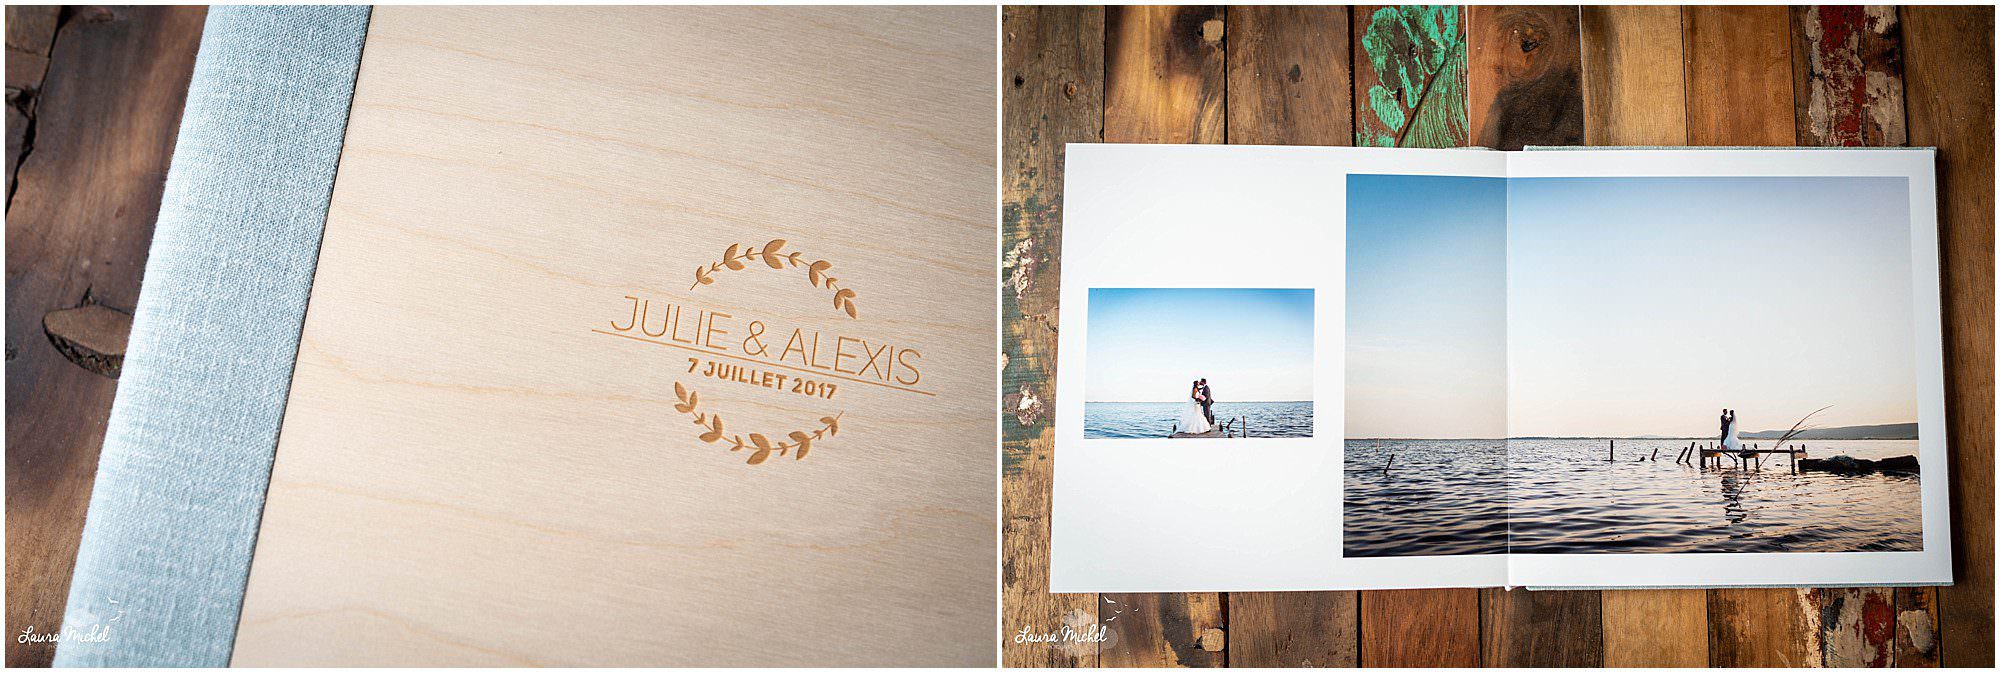 photographe mariage evjf famille montpellier album photo packaging luxe professionnel_0001